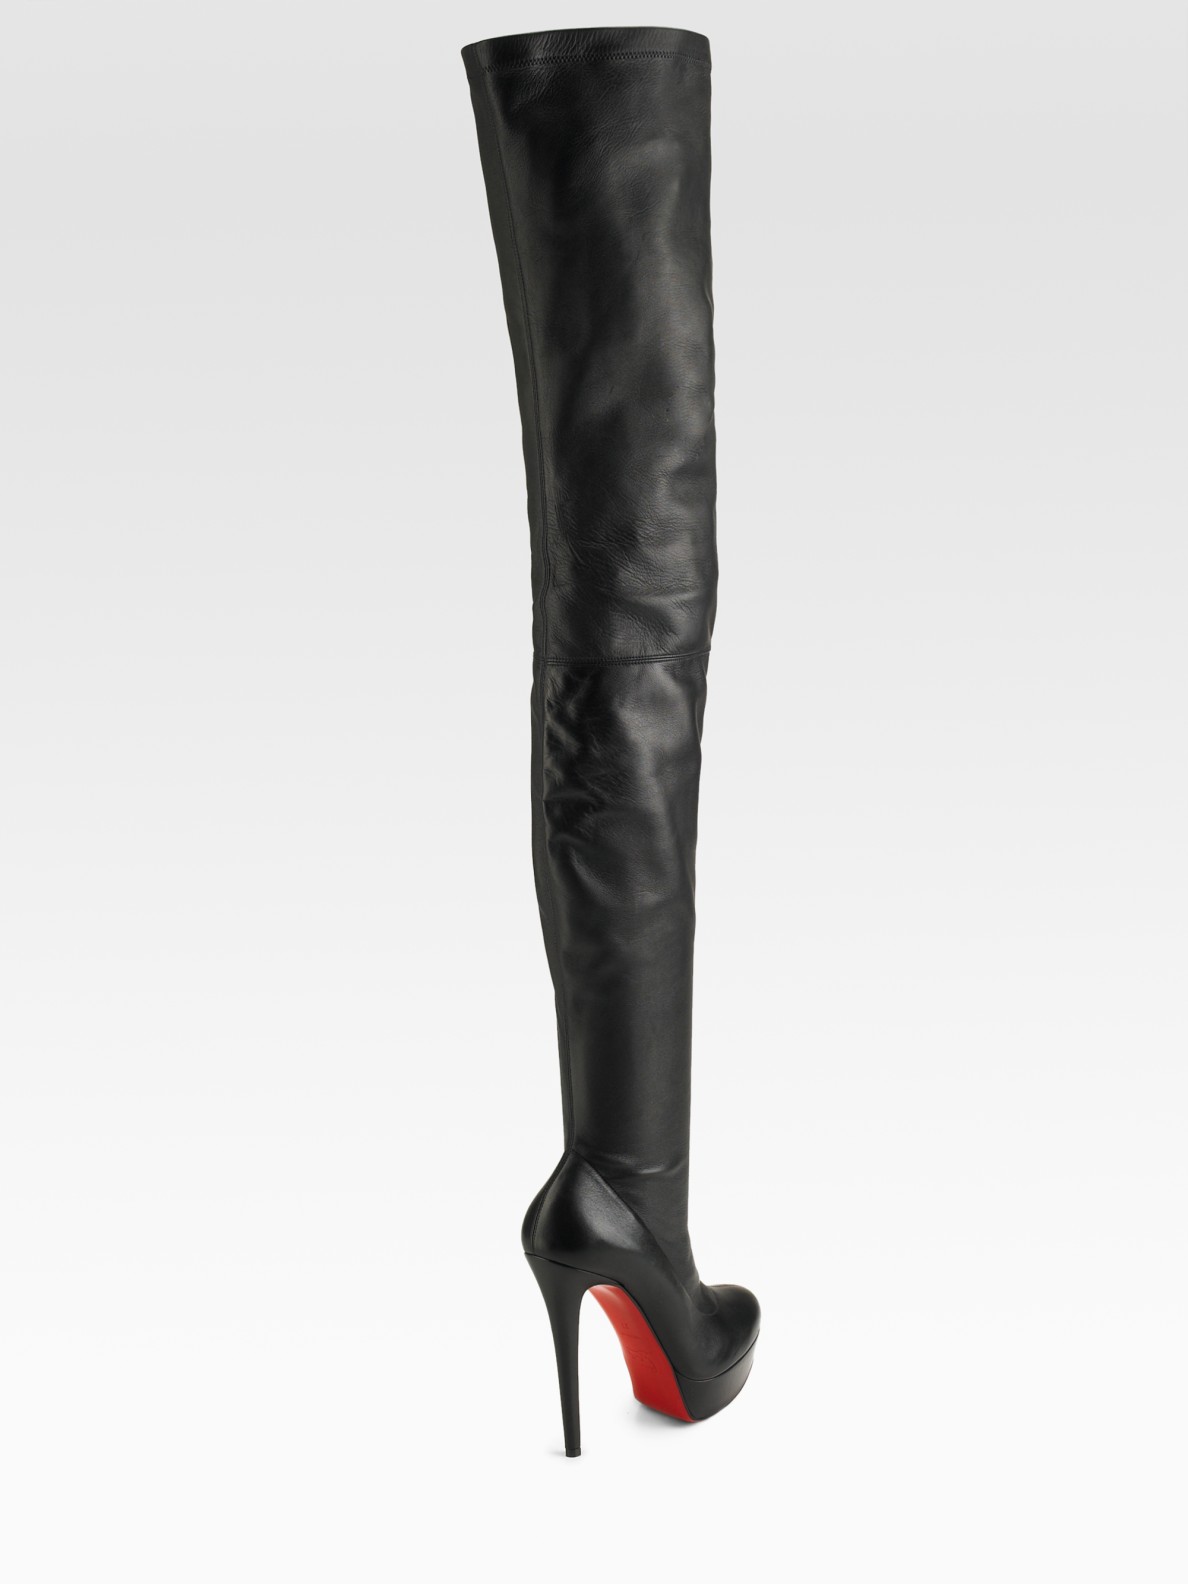 Christian Louboutin Gazolina Over-the-knee Boots in Black | Lyst